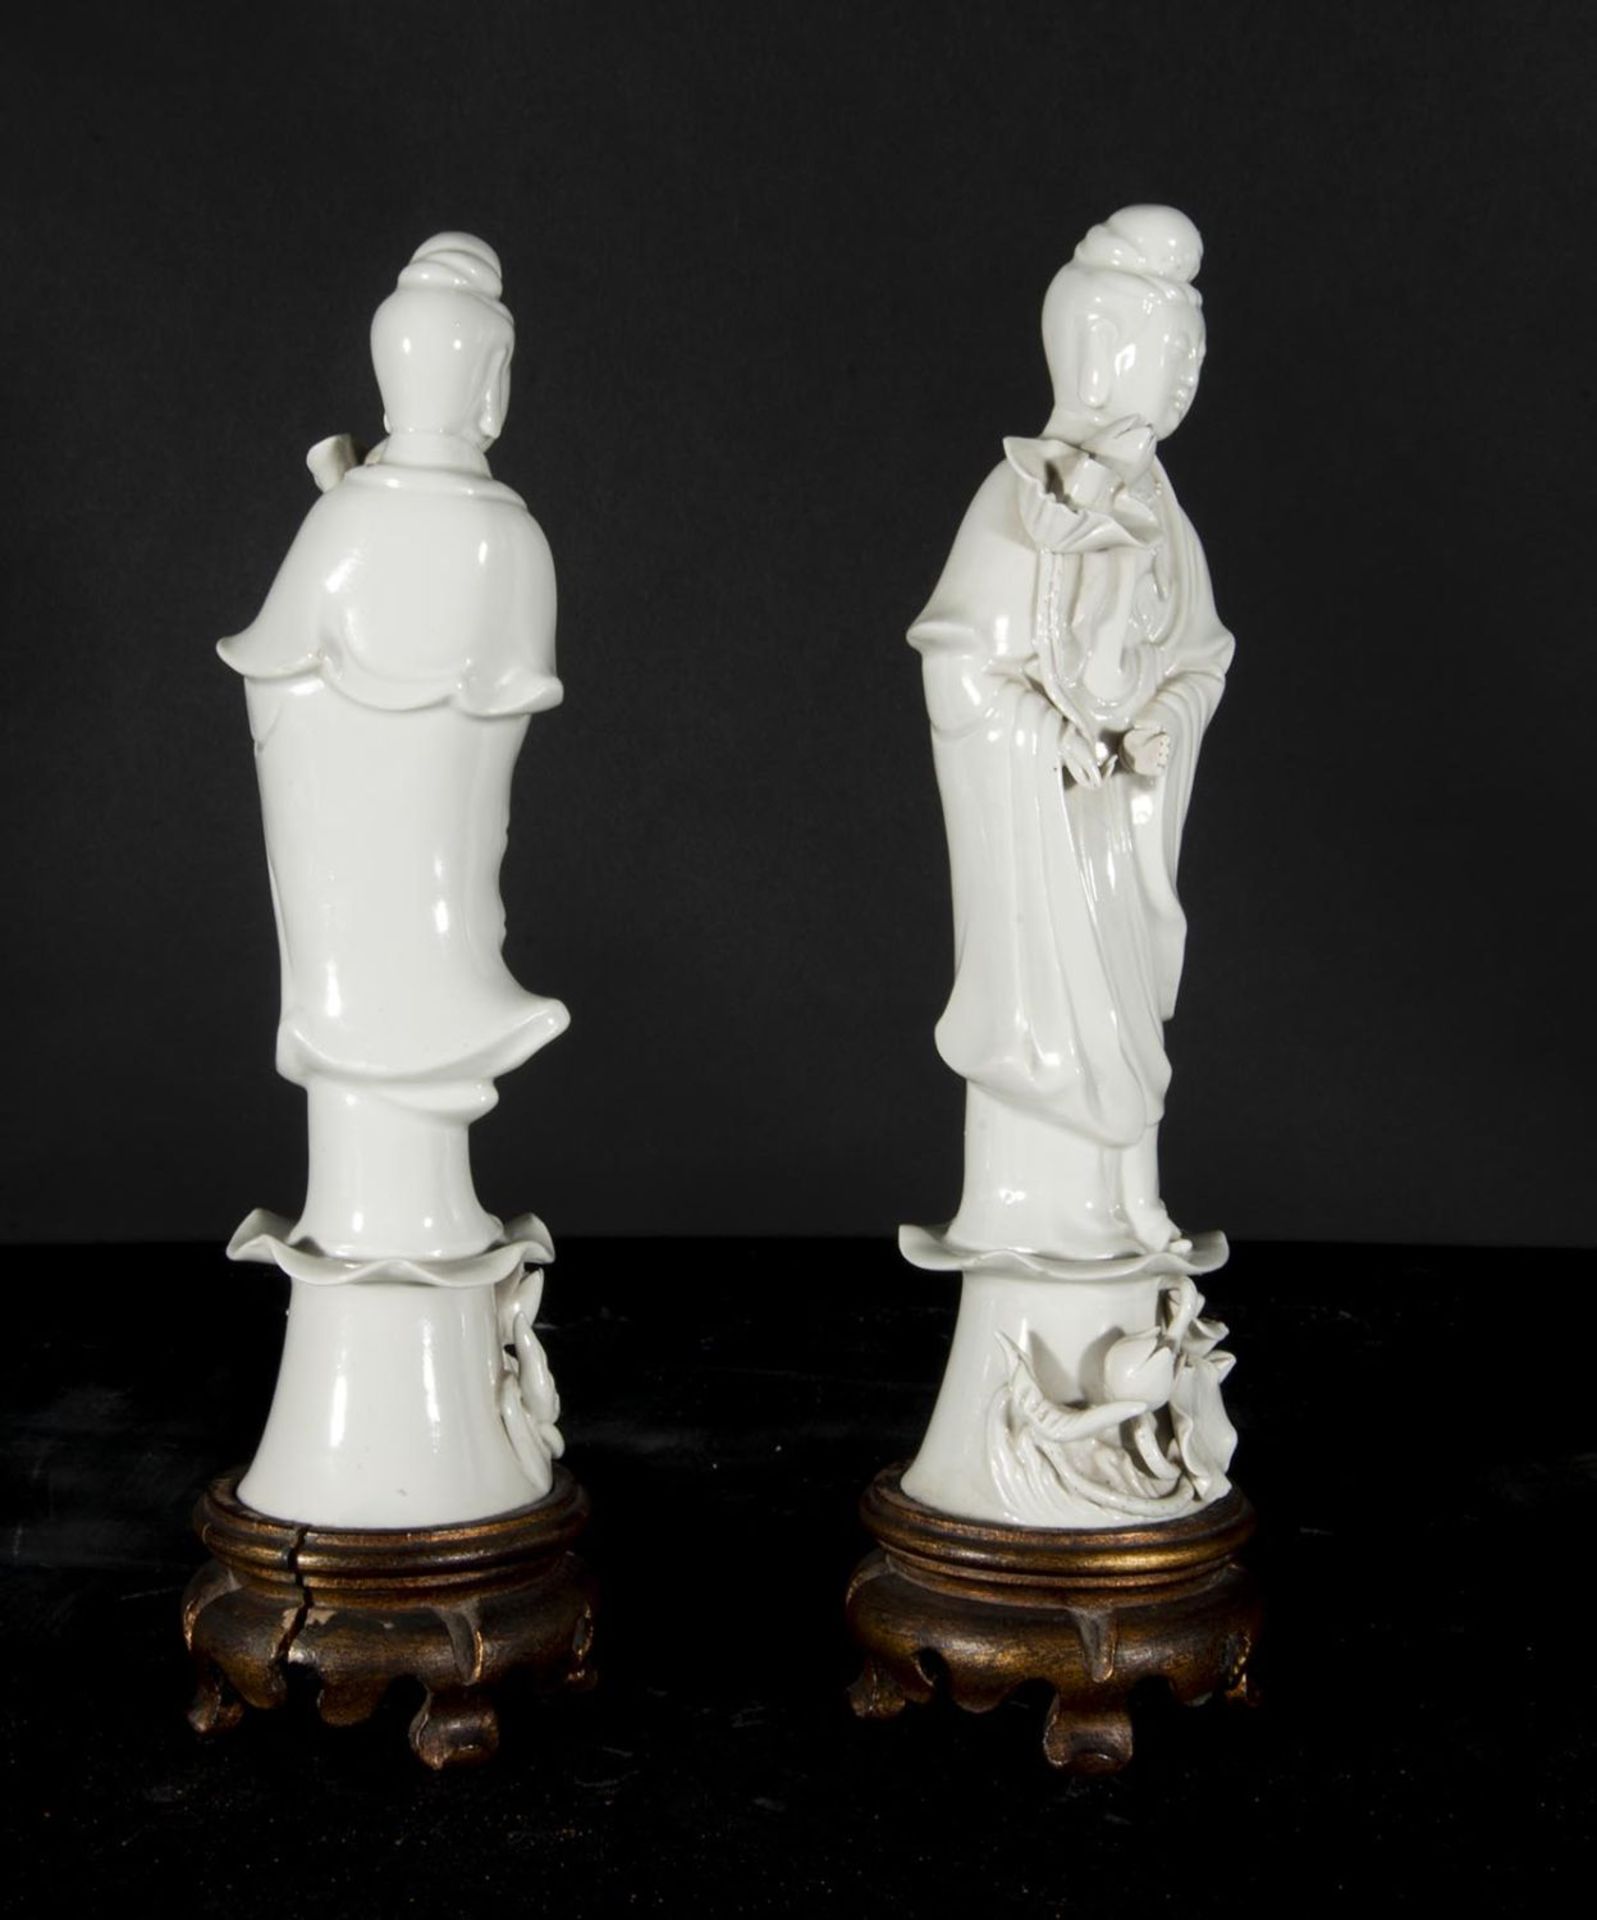 Pair of Guanyins in blanc de chine porcelain, 20th century Chinese school - Image 2 of 2